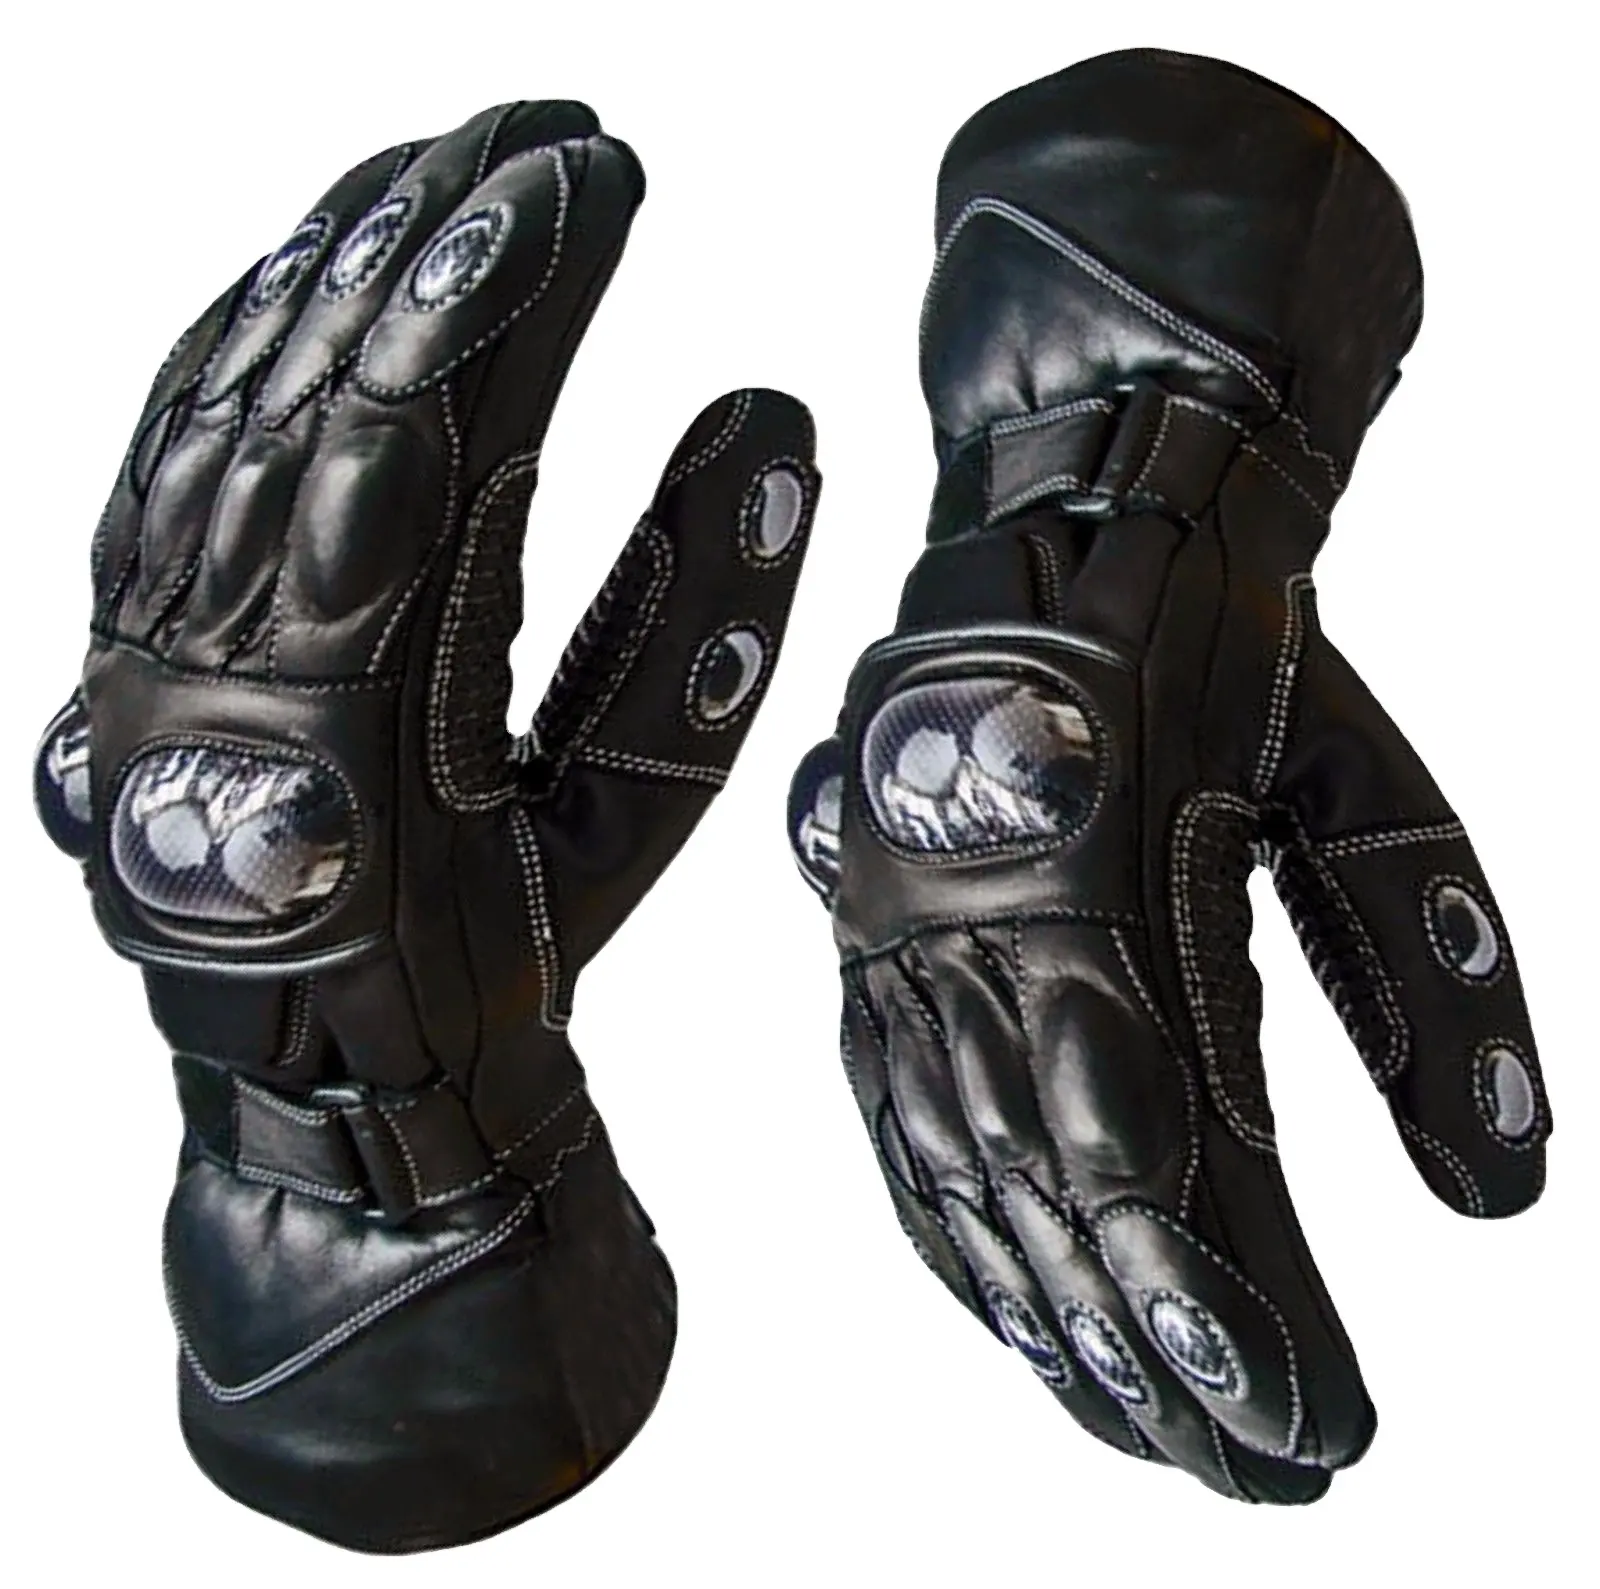 Premium Leather Racing Gloves Motorcycle Riding Knuckle Protect Motorbike Motocross Sports gloves